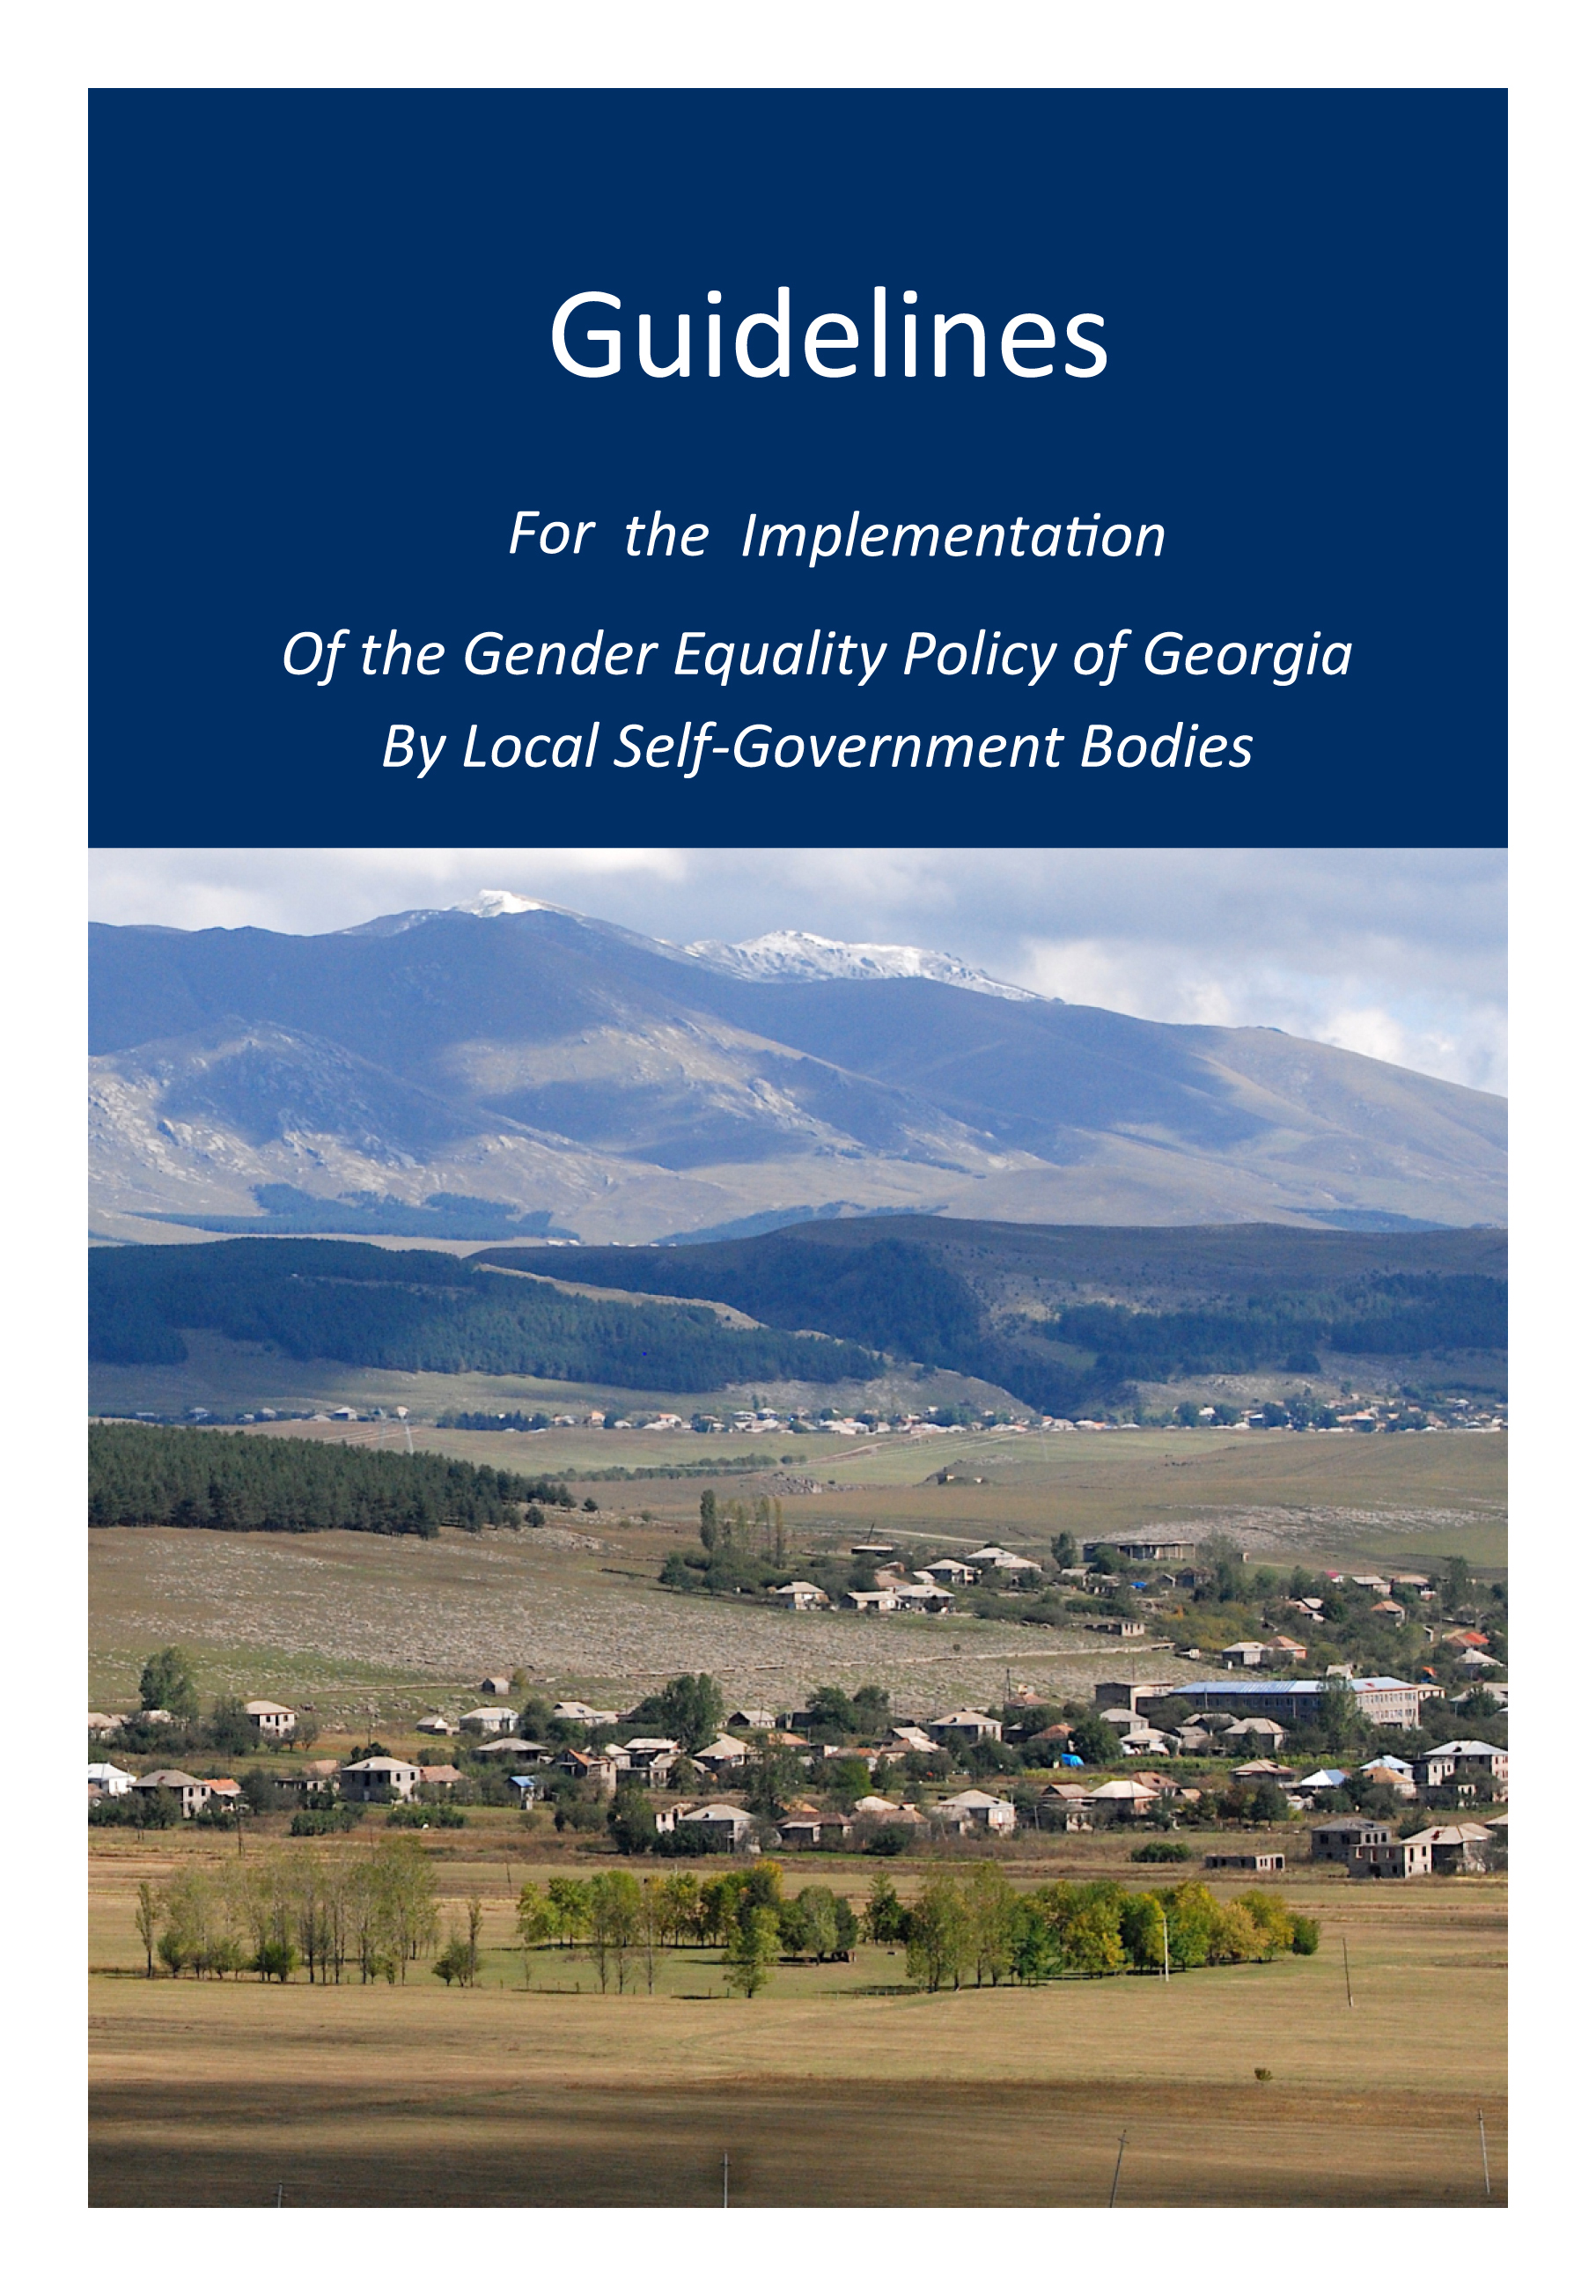 Gender Guidelines for Local Governments